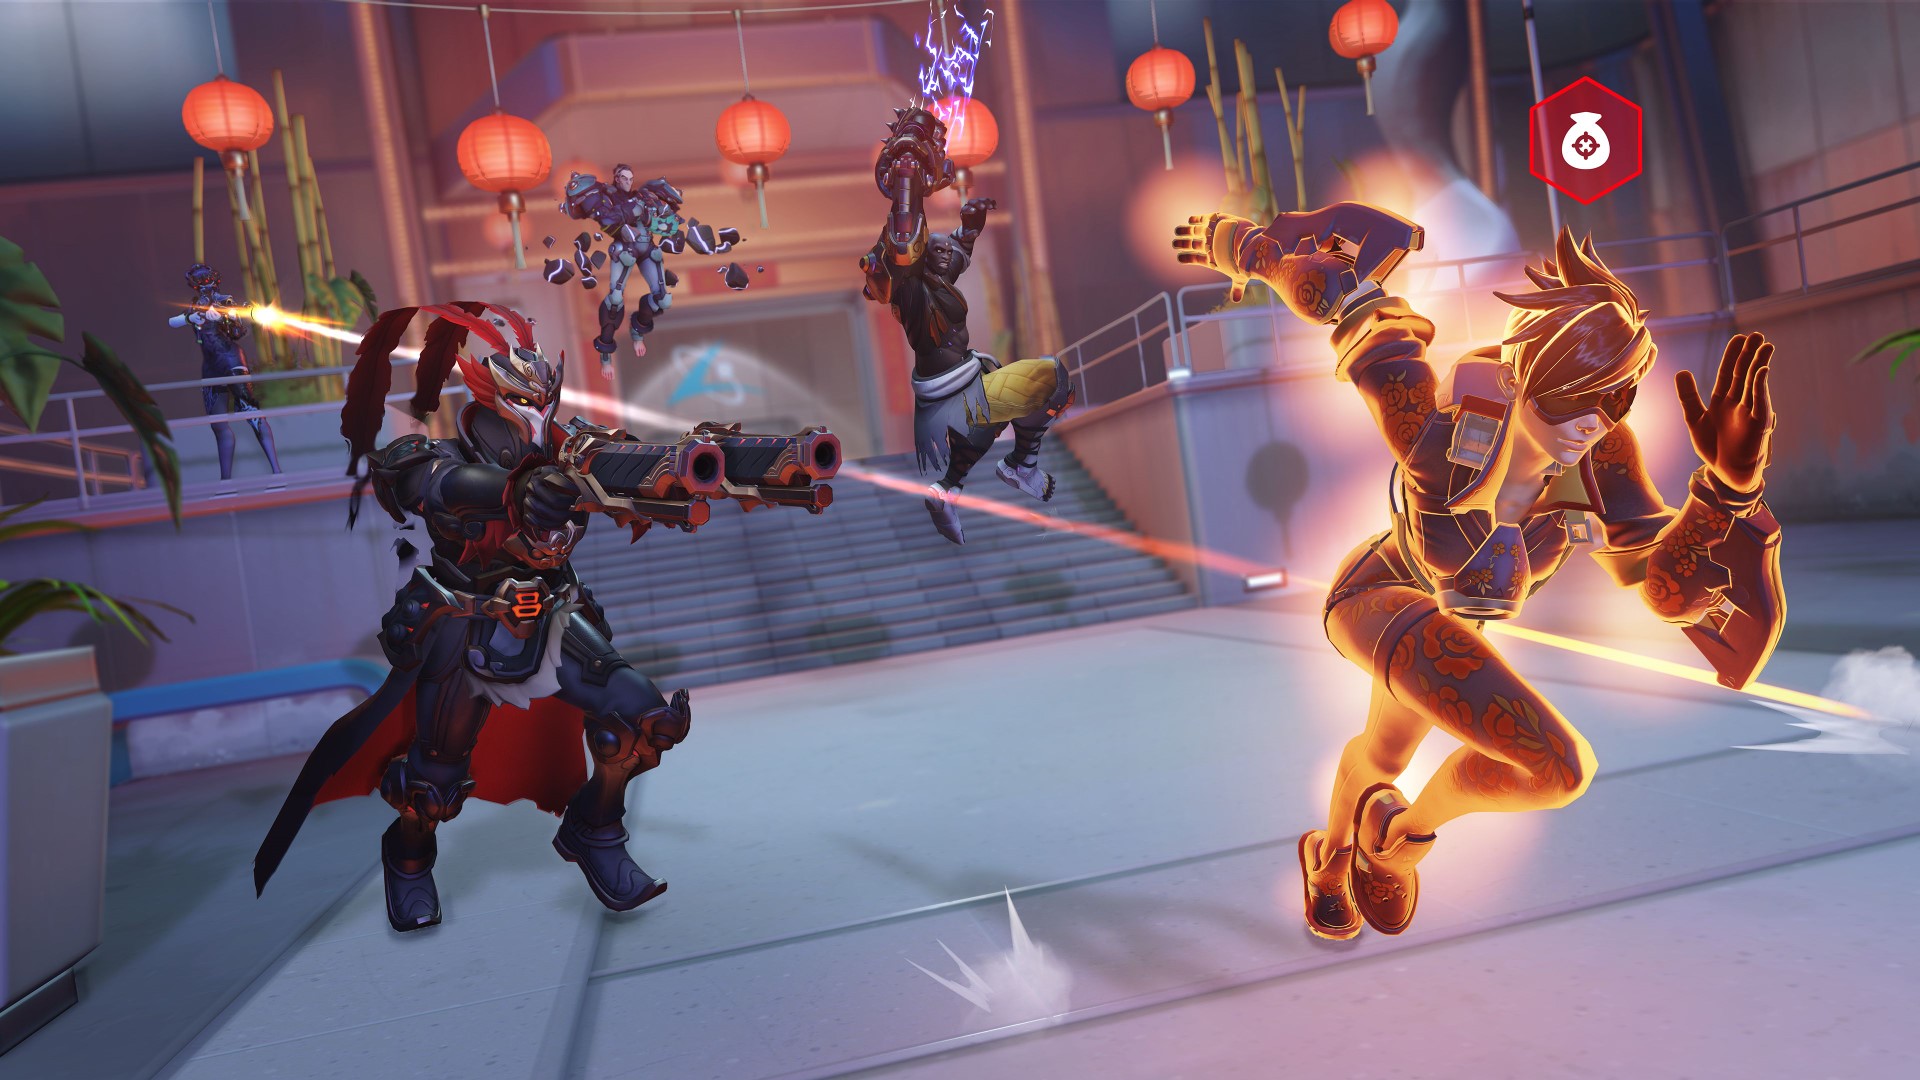 Overwatch's Lunar New Year event adds five Epic skins and a Bounty